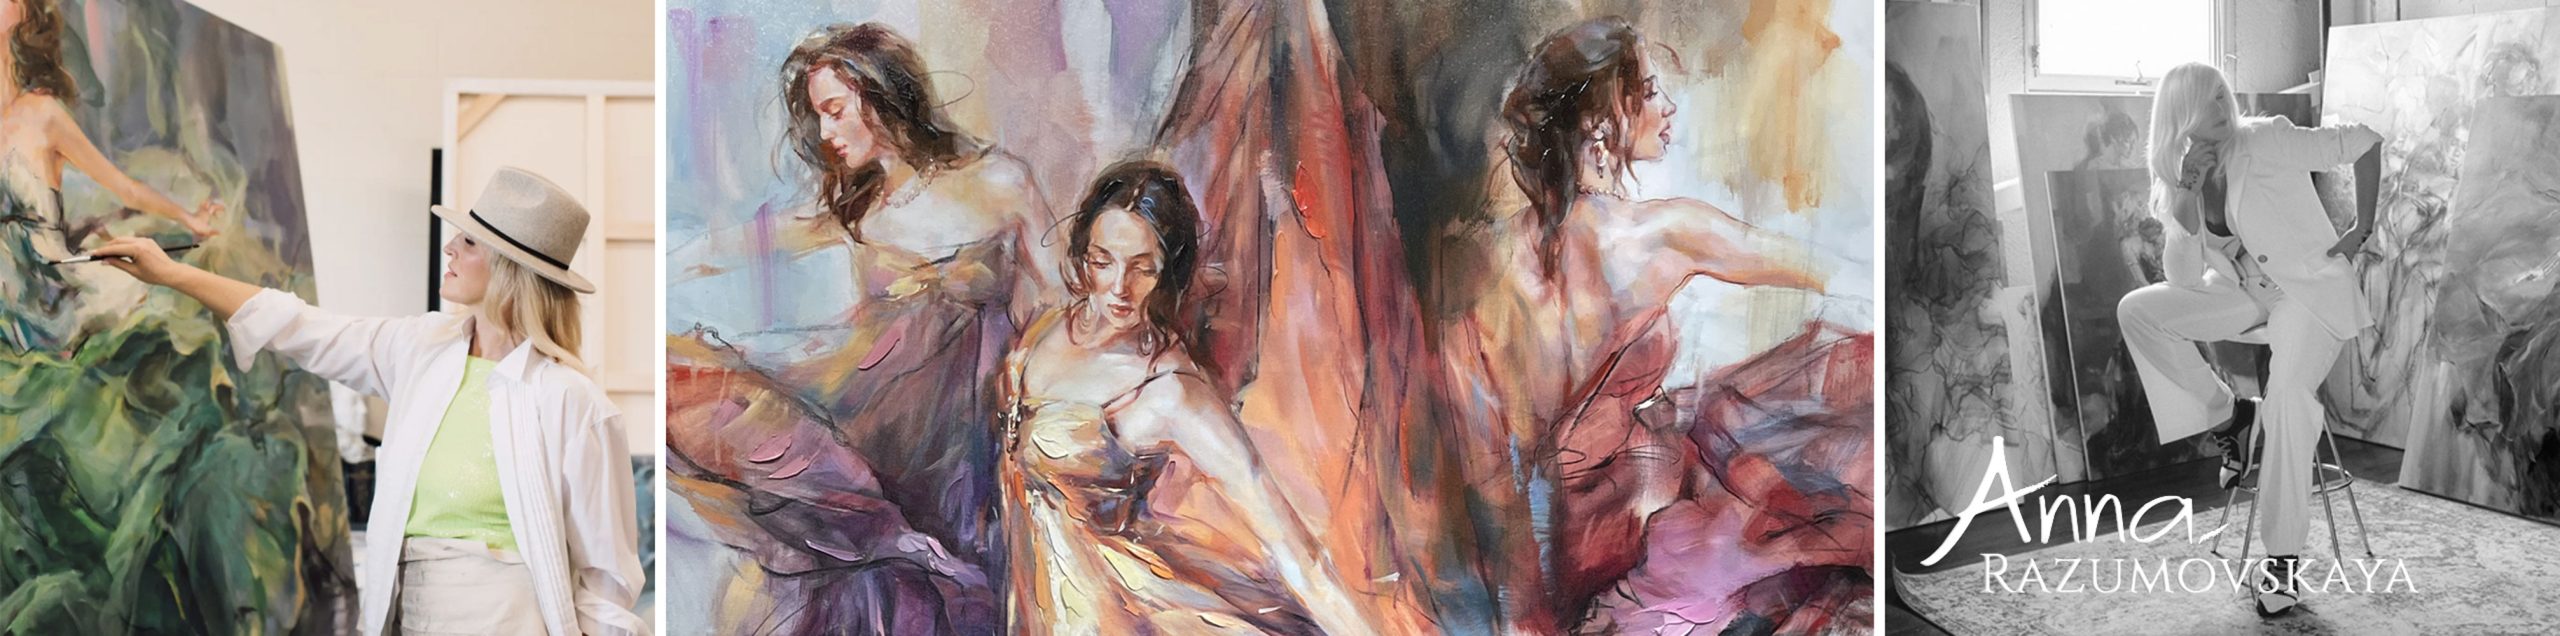 Anna Razumovskaya, contemporary impressionist creating romantic figurative paintings of danciners, florals and musicians.